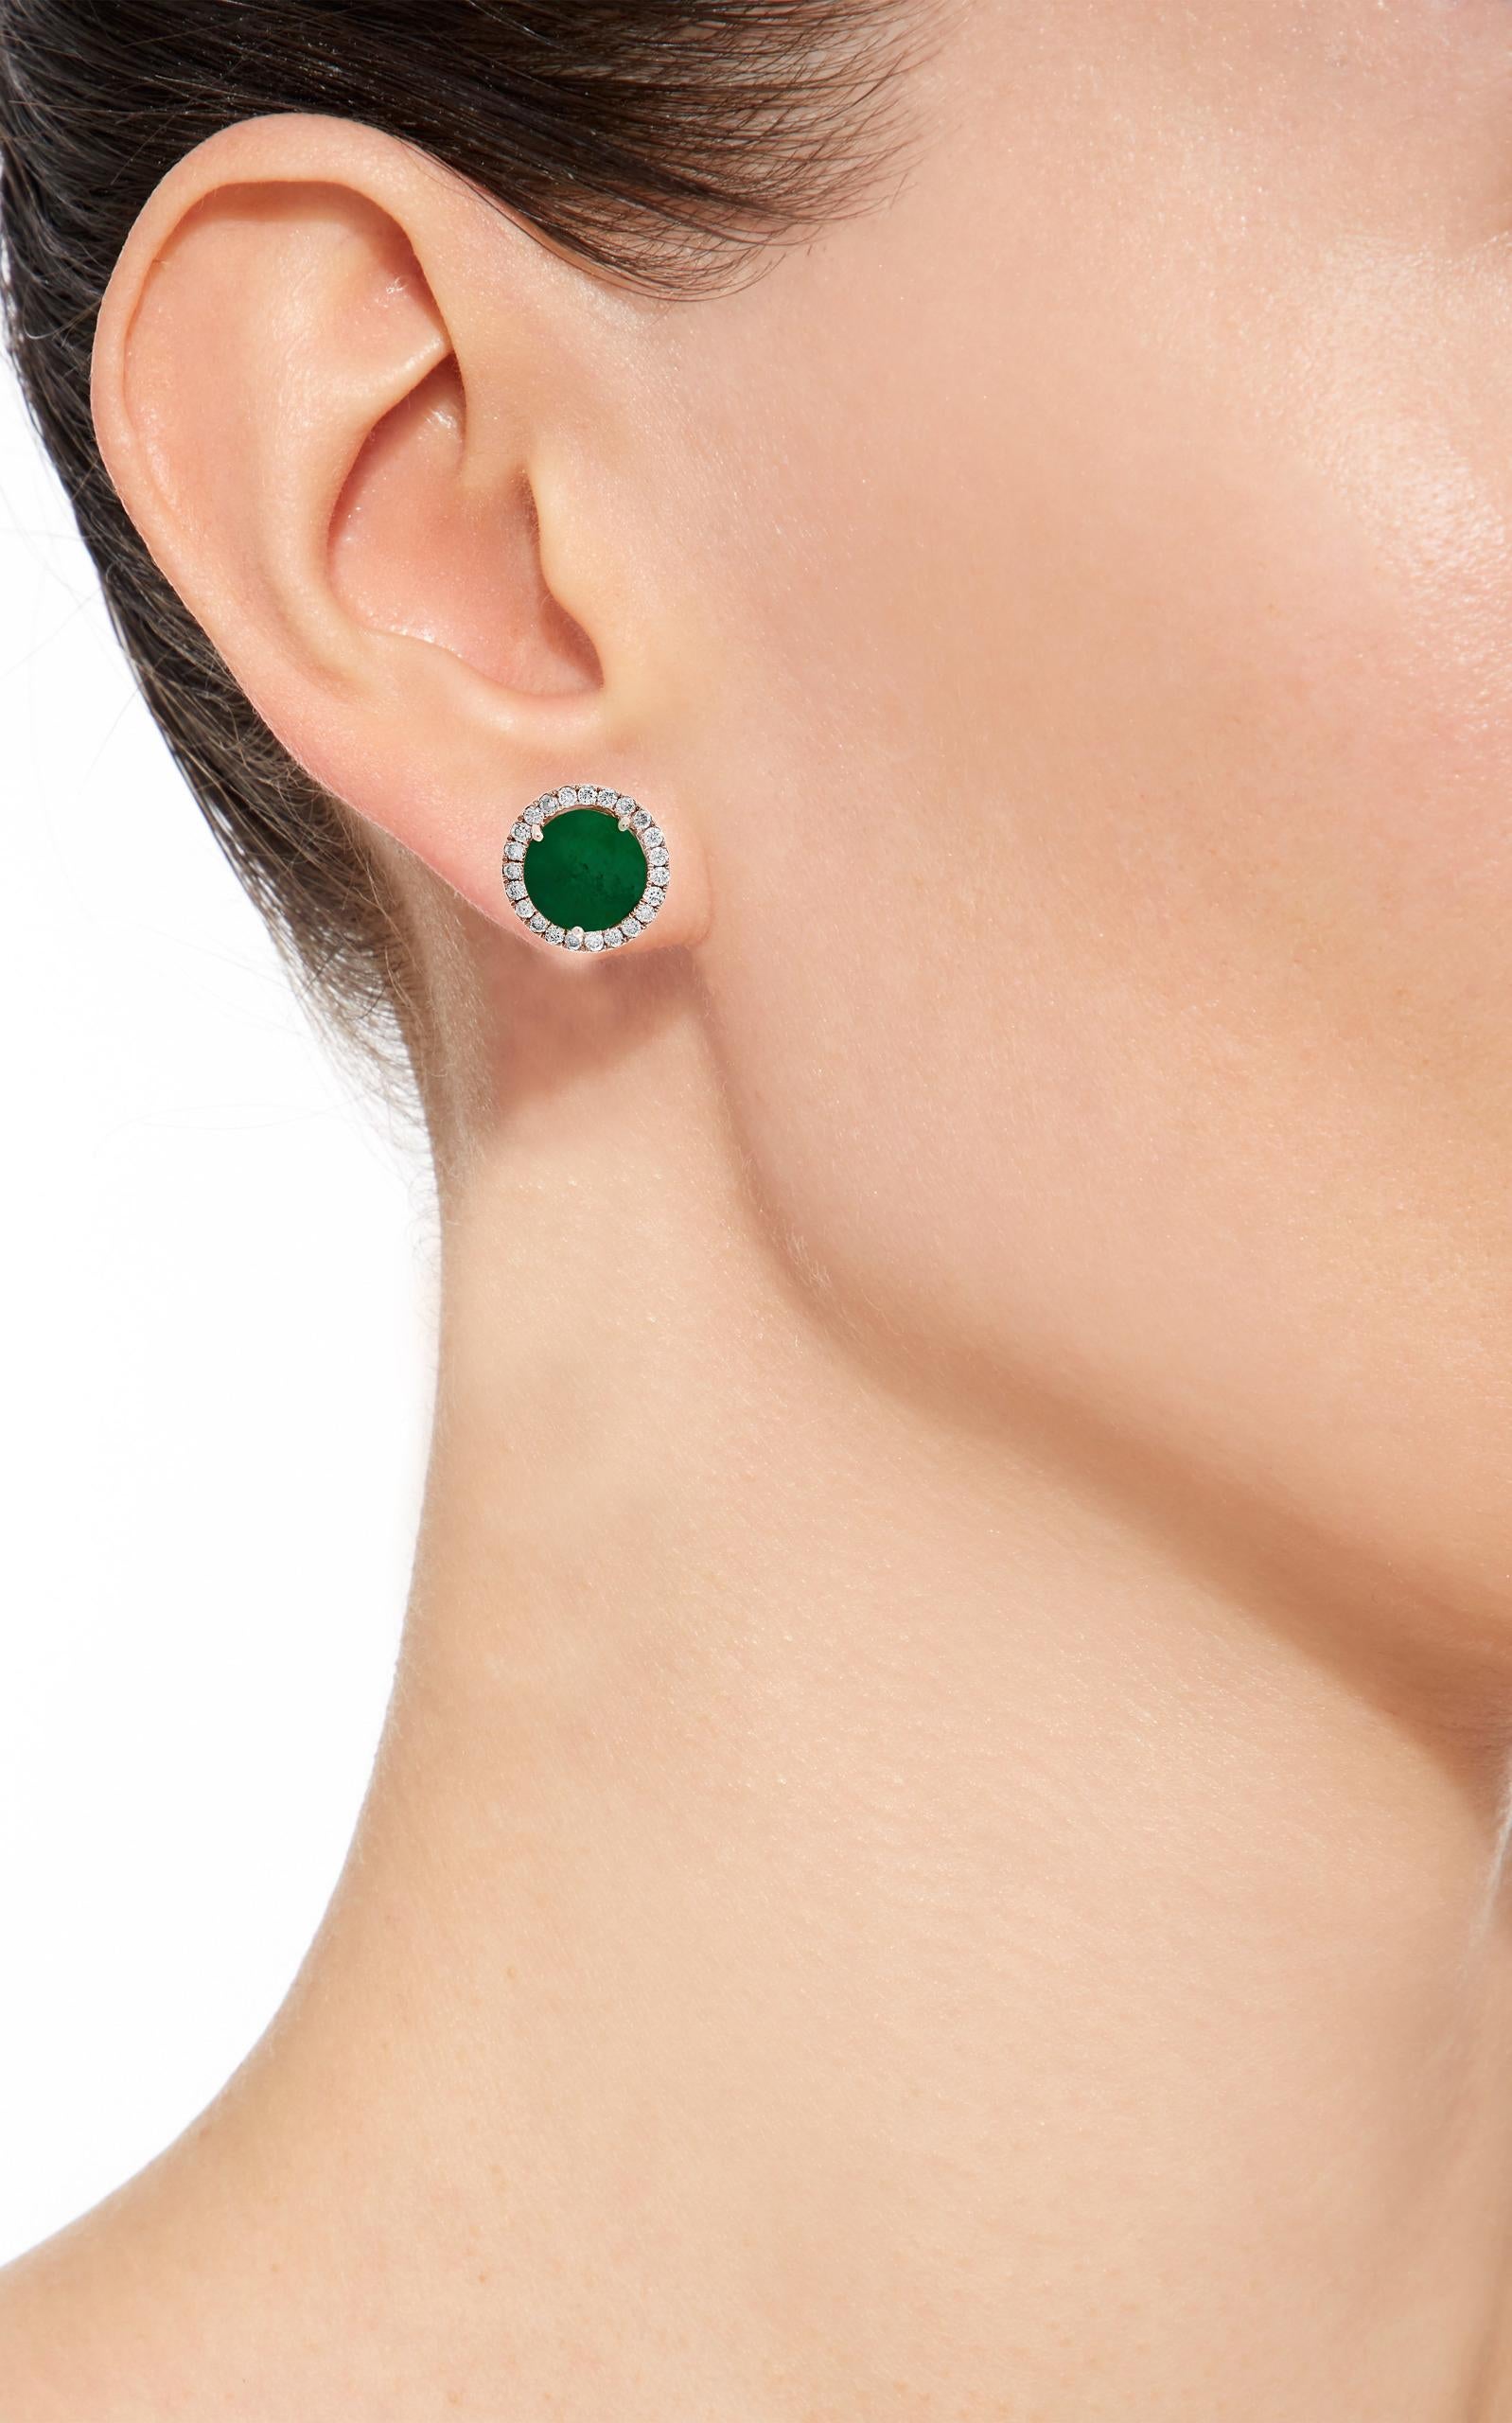 

3.8  Carat finest Round Cut Emerald  perfect pair with  Diamond  Post  Earrings  18 Karat  Pink Gold 
This exquisite pair of earrings are beautifully crafted with 14 karat Rose gold .
Weight of 18 K gold 5 grams
 Fine  Round Cut Emeralds weighing